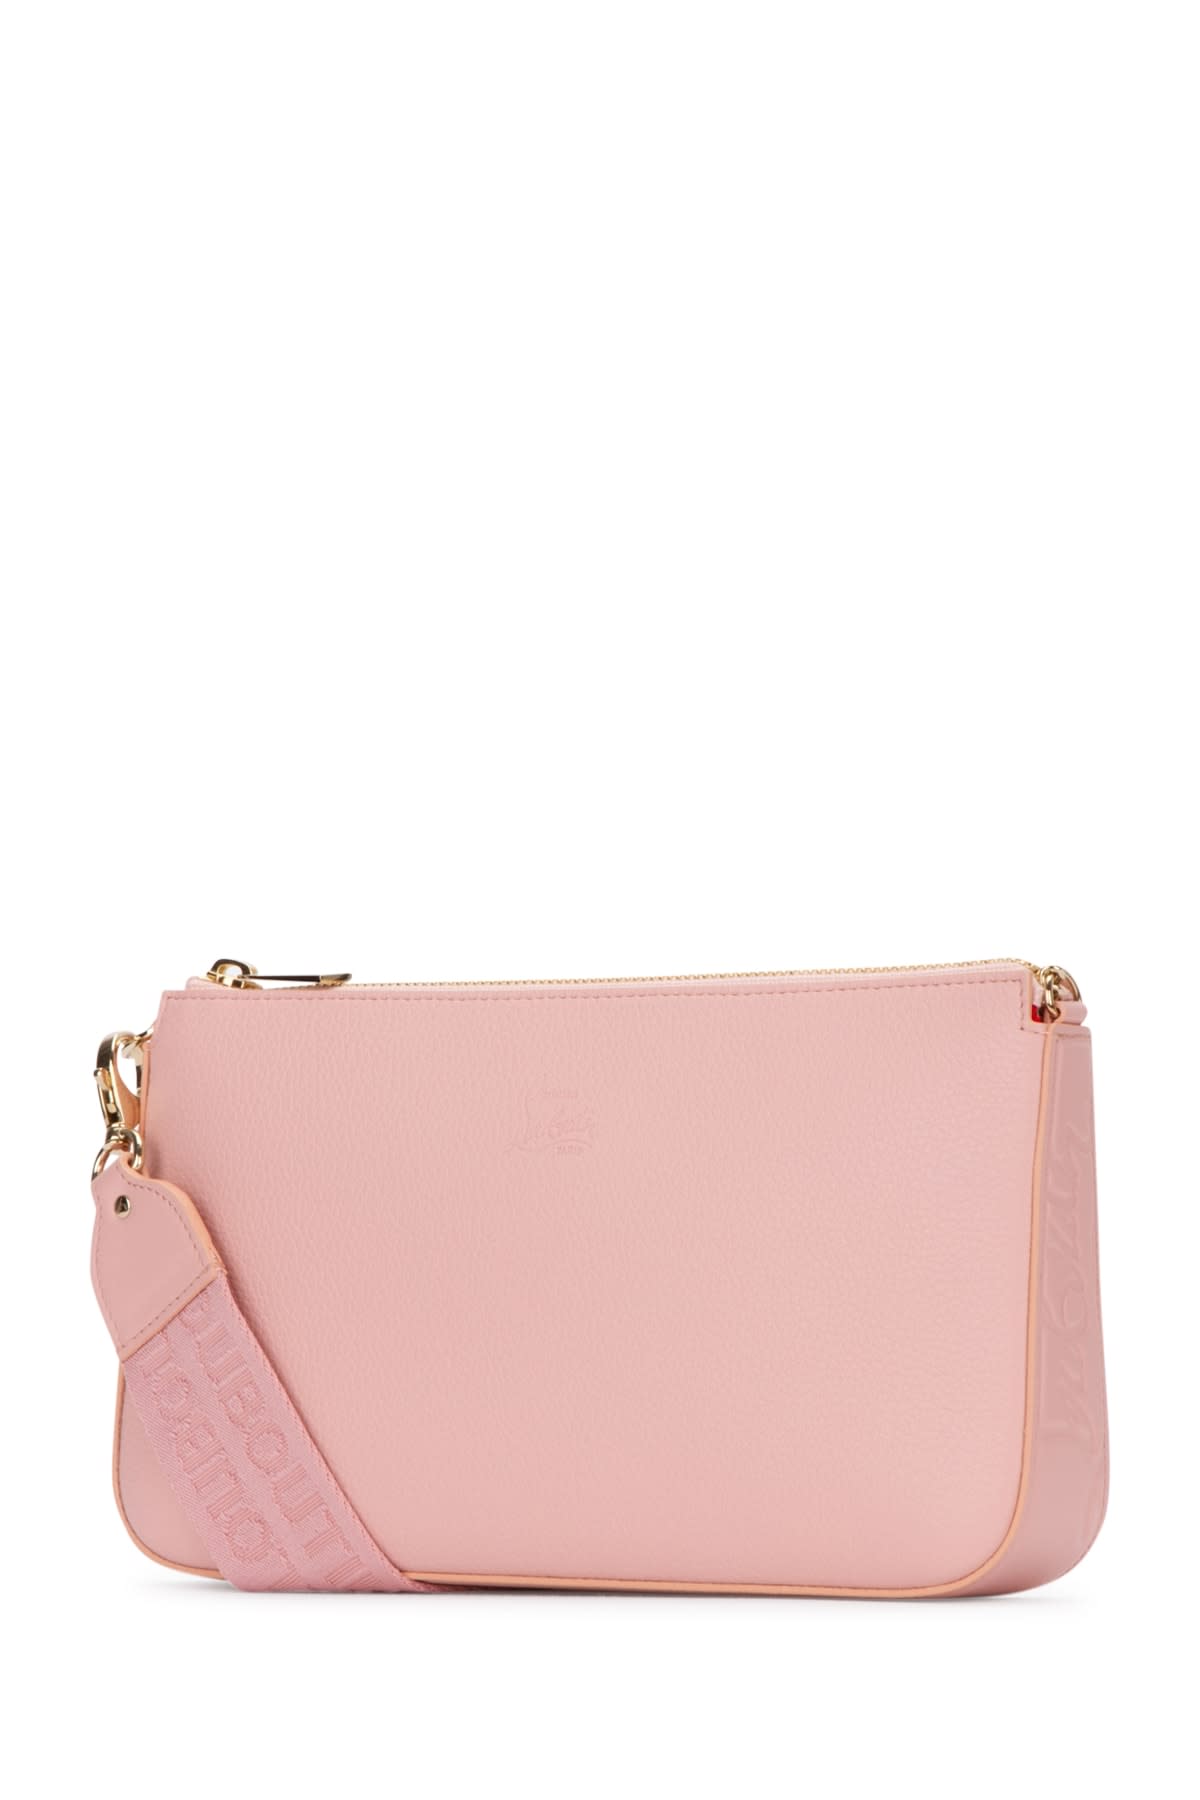 Christian Louboutin Pouch In P712